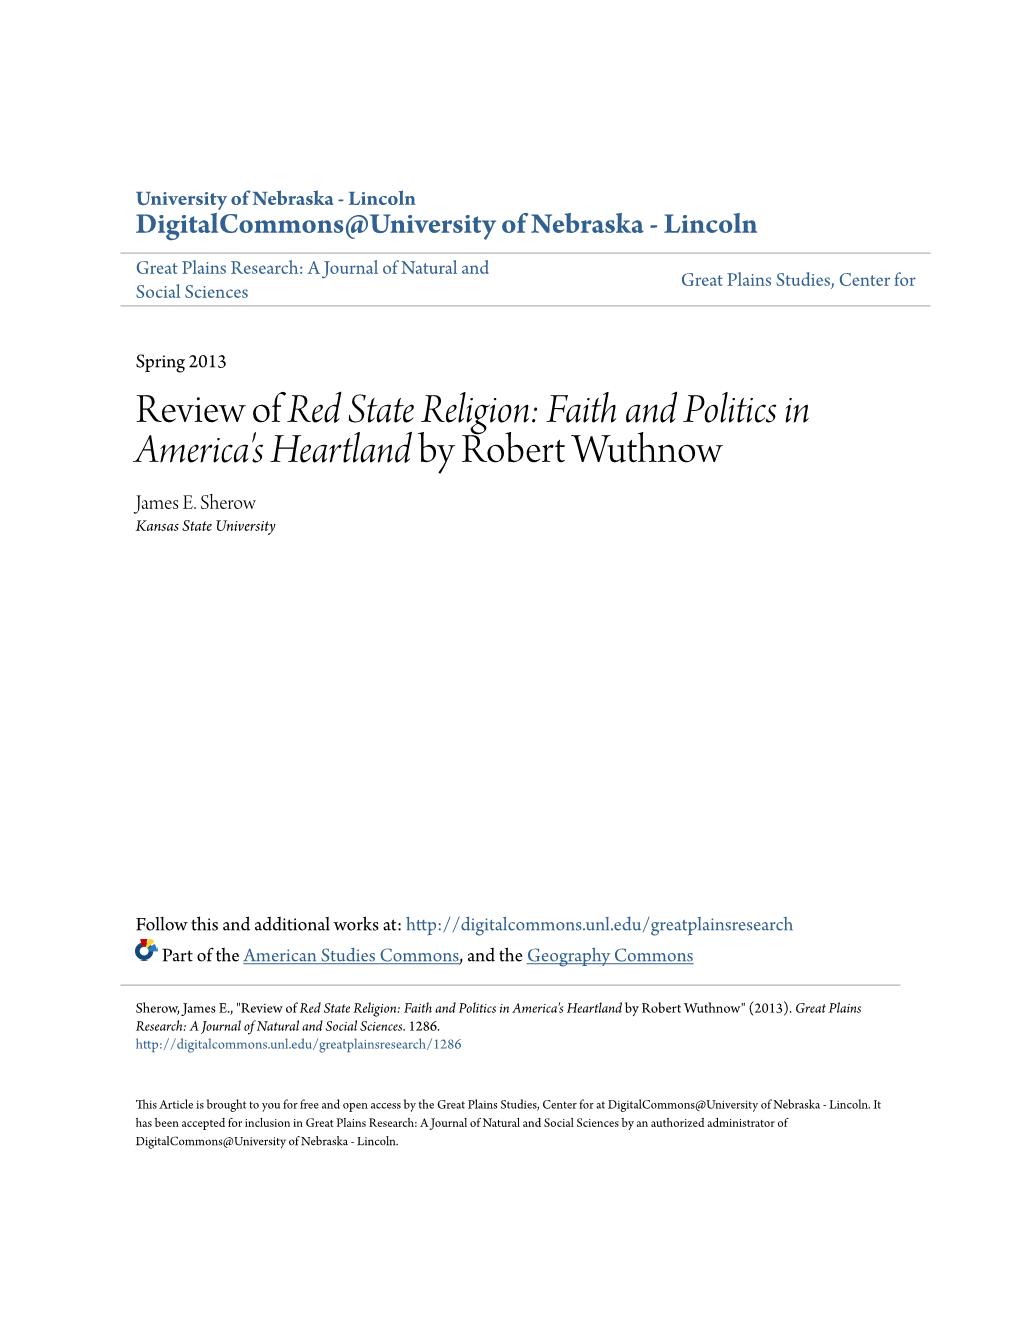 Review of Red State Religion: Faith and Politics in America's Heartland by Robert Wuthnow James E